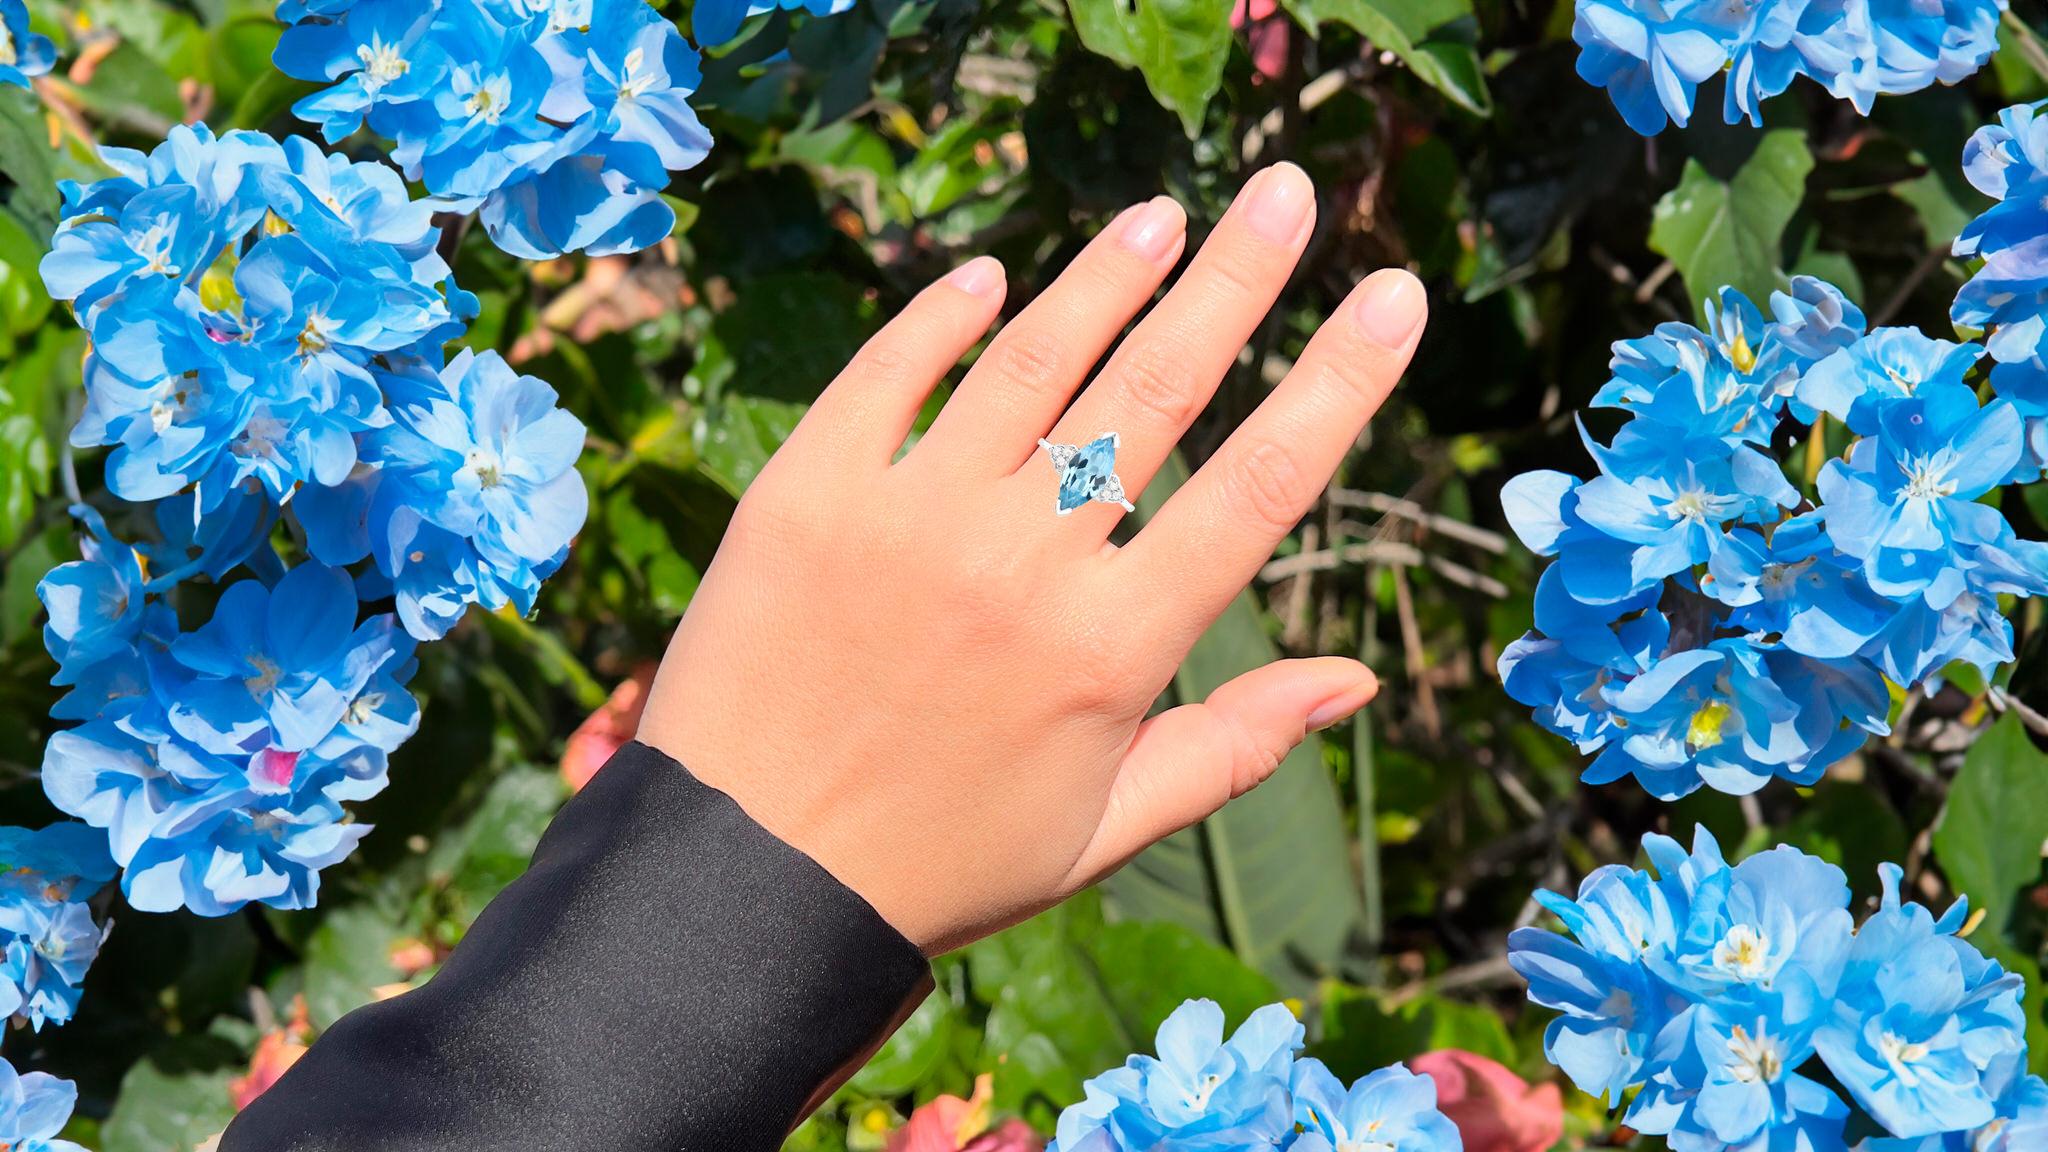 It comes with the Gemological Appraisal by GIA GG/AJP
All Gemstones are Natural
Swiss Blue Topaz = 3.65 Carats
6 White Topazes = 0.12 Carats
Metal: Rhodium Plated Sterling Silver
Ring Size: 6* US
*It can be resized complimentary